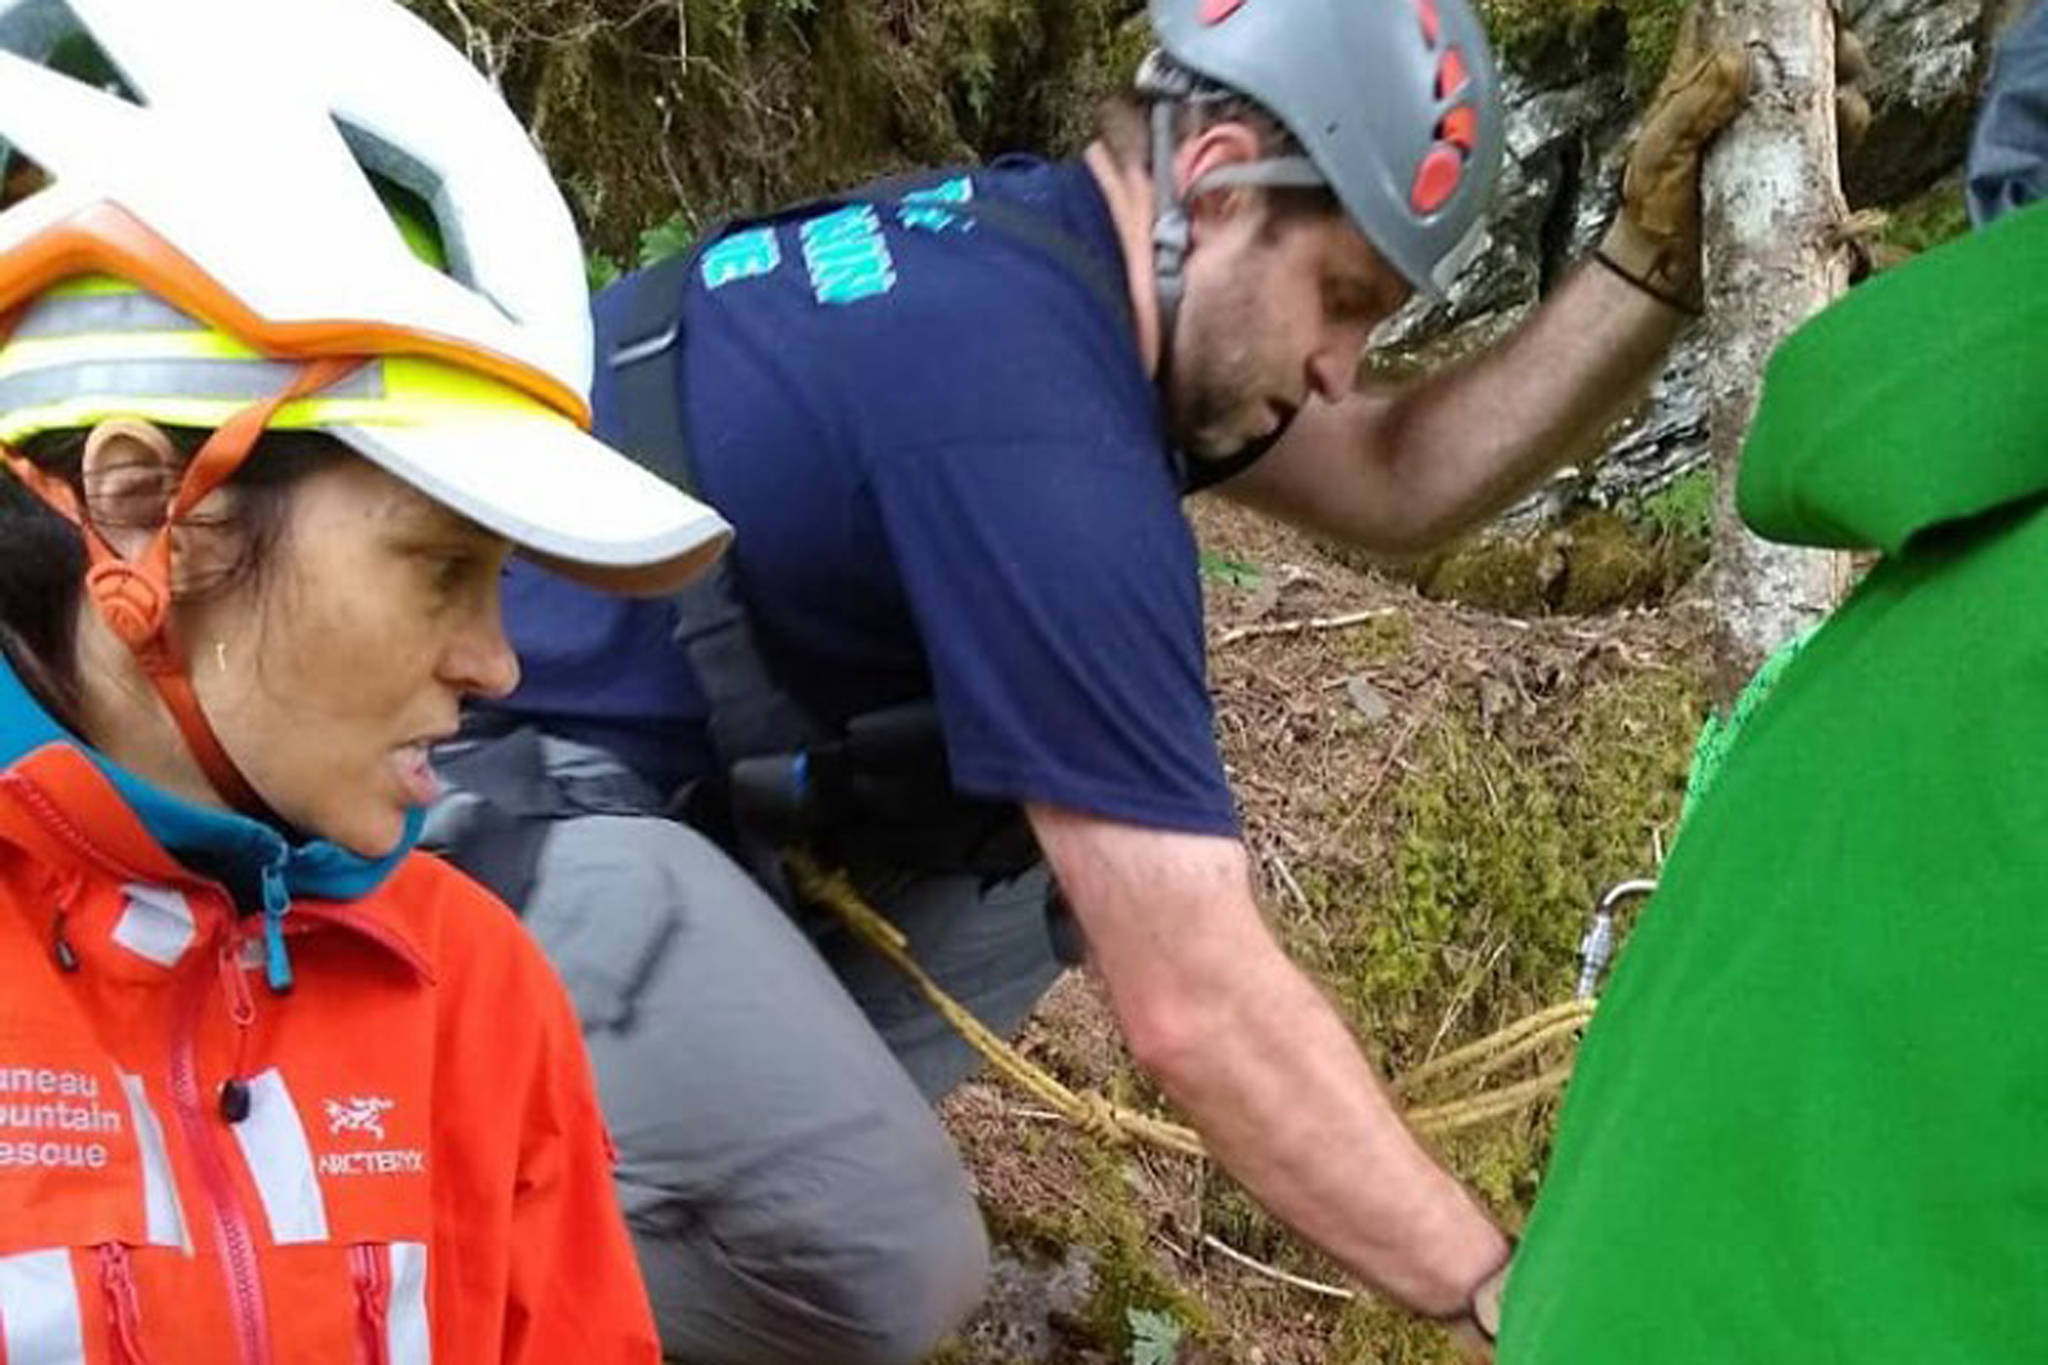 Rescuers get lost hikers down during 8-hour mountain rescue